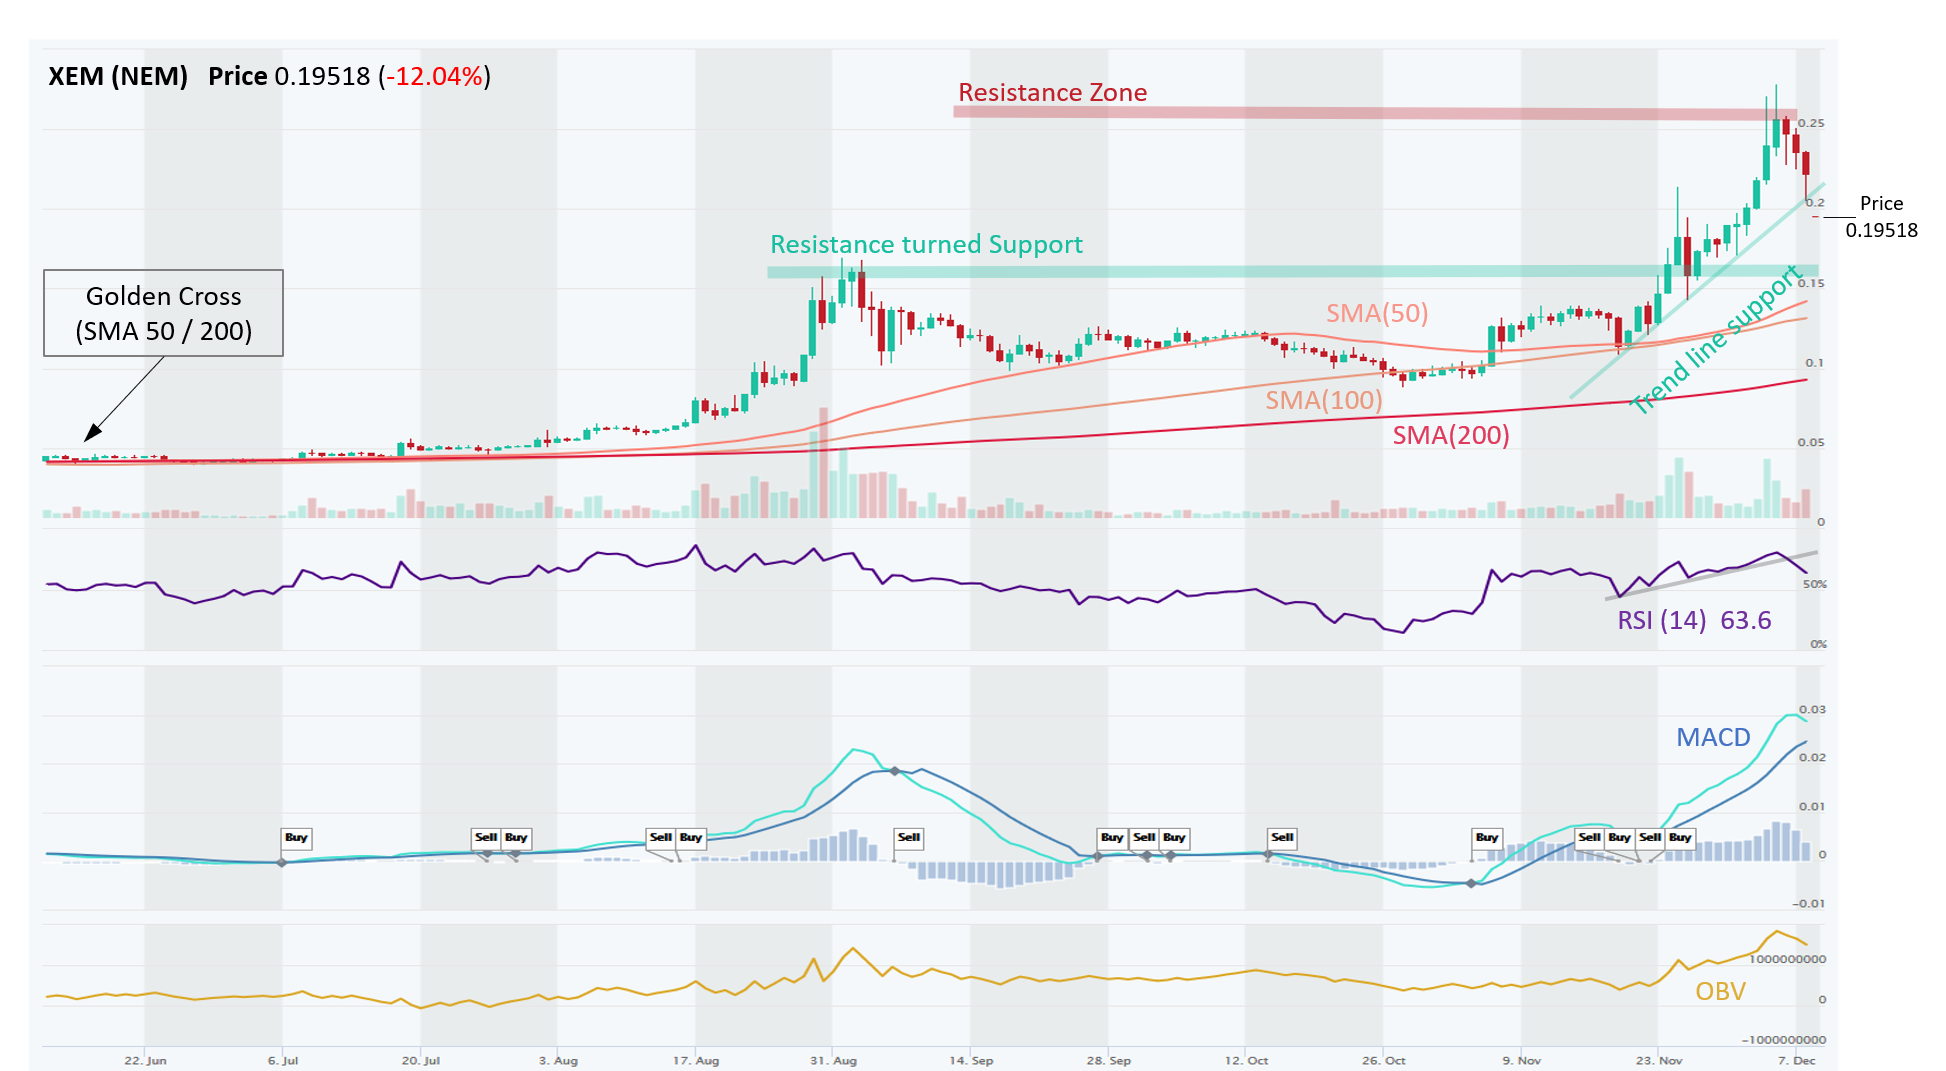 Cryptocurrency analysis of Waves (WAVES), NEM (XEM), Litecoin (LTC), Celsius (CEL), and Neo (NEO ...